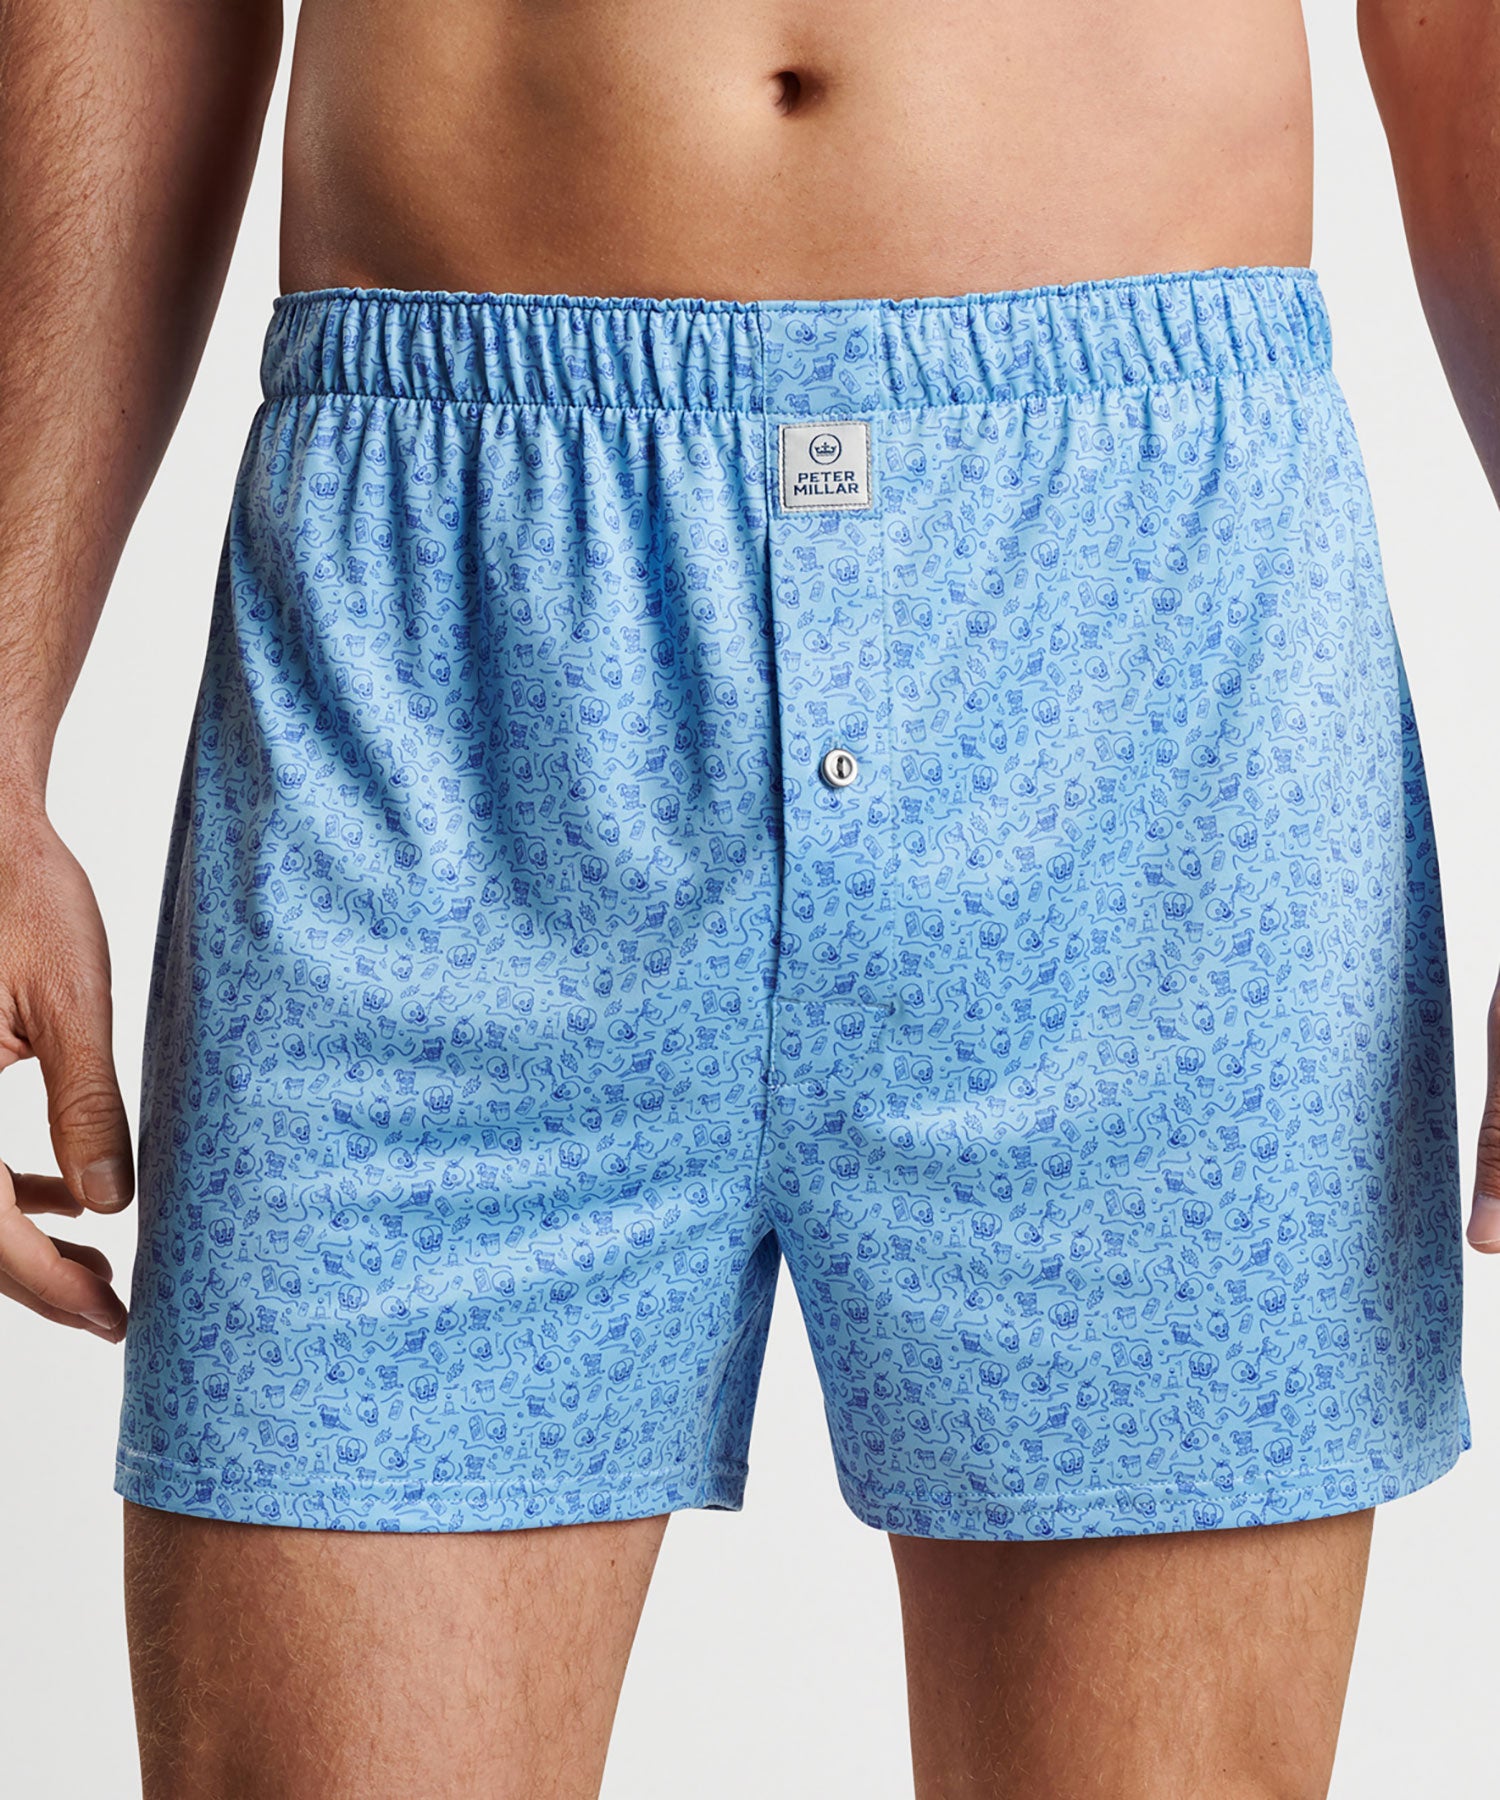 Day One Underwear  Boxer Shorts, Loungewear - Long-Cut Tapered